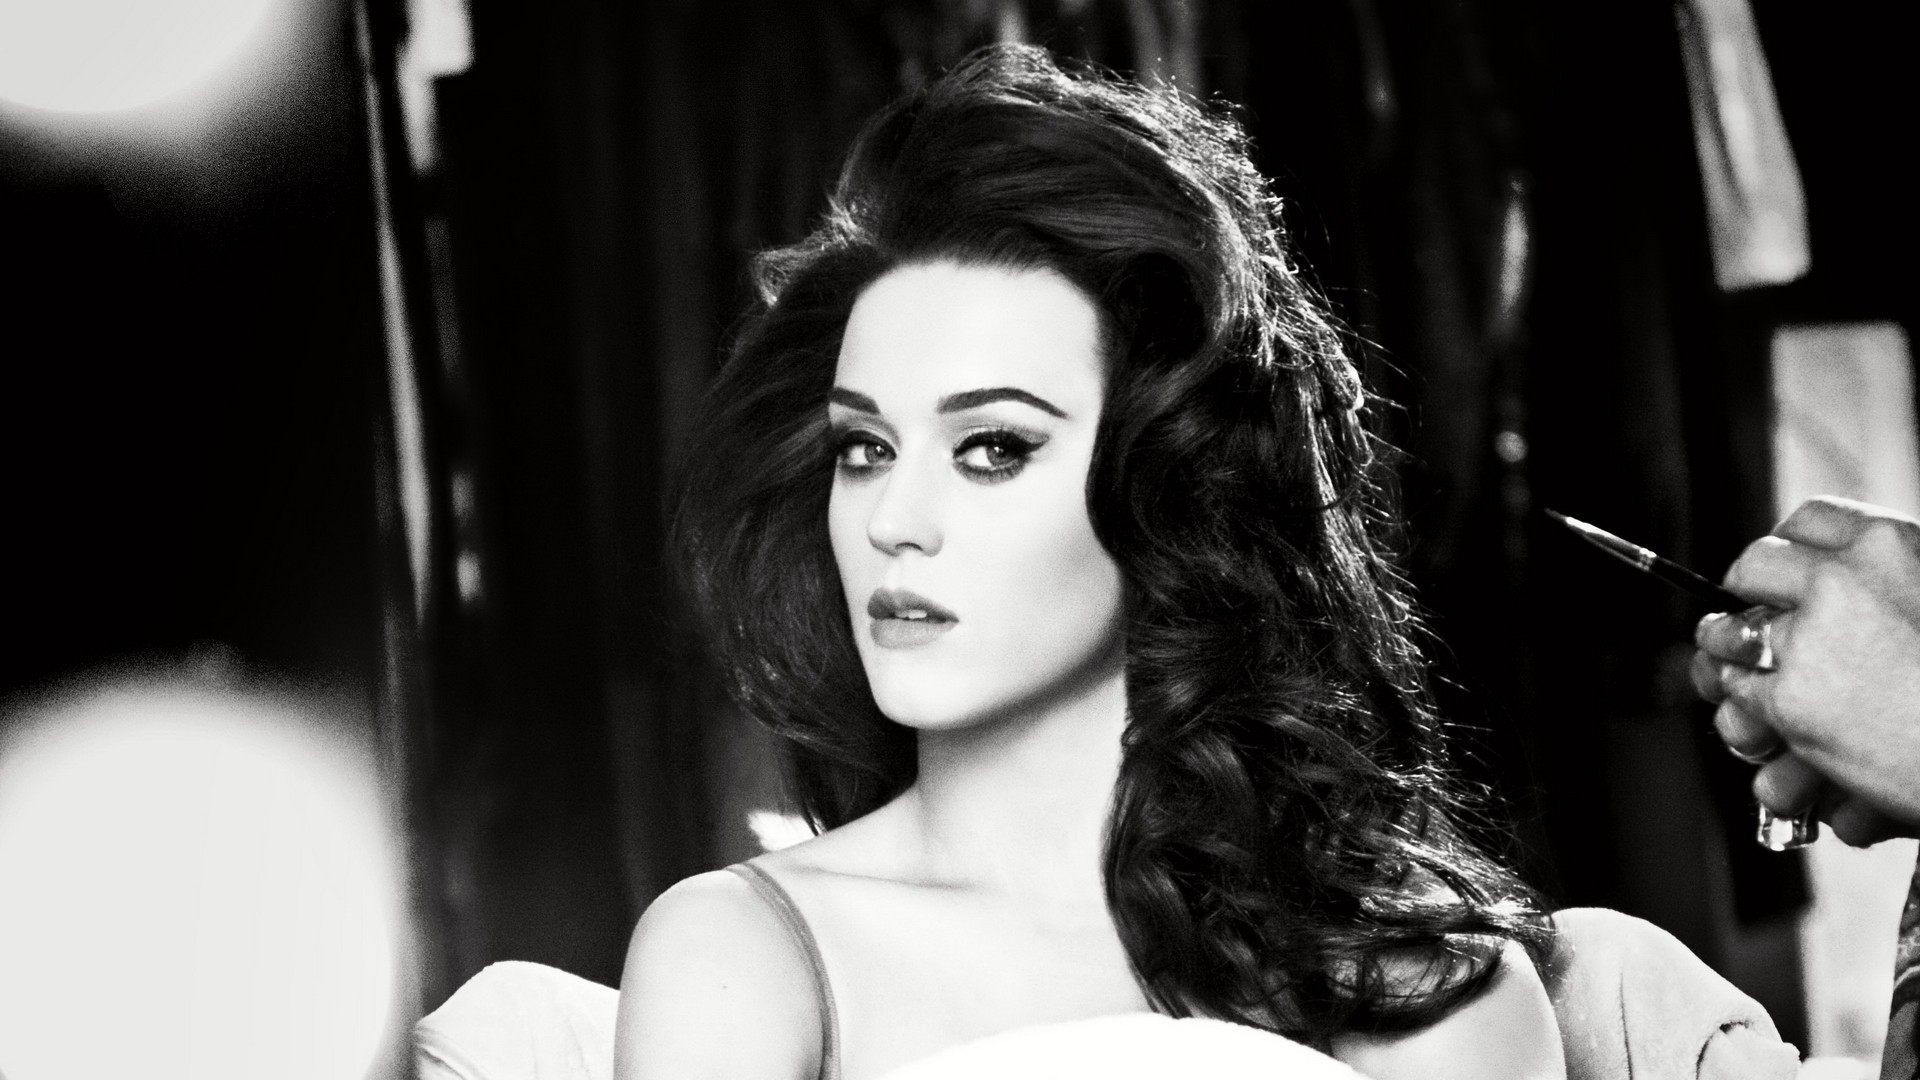 1920x1080  Wallpaper katy perry, eyes, face, singer, black and white